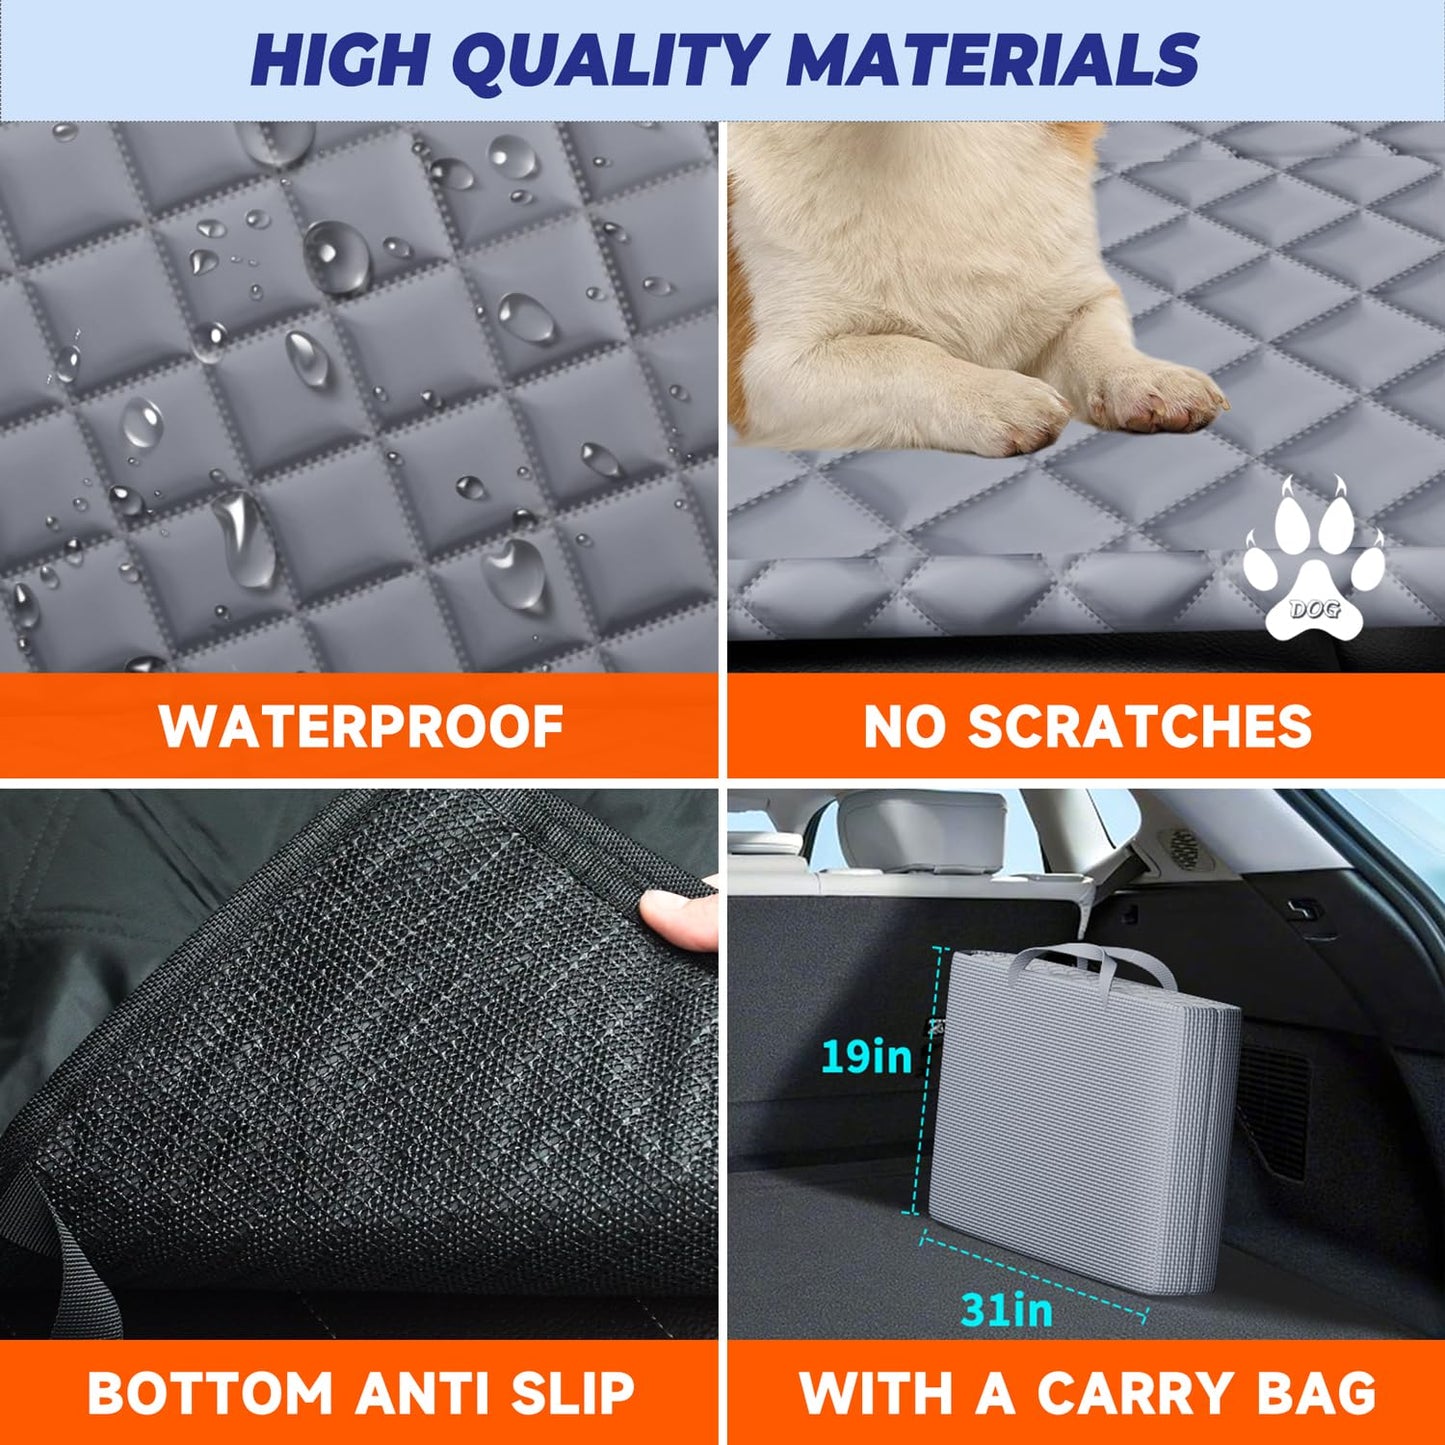 Dog Seat Cover for Trucks, Hard Bottom Dog Hammock Back Seat Extender for Dogs for F150, RAM1500, Silverado - Waterproof Truck Seat Protector for Dogs Back Seat (Black)